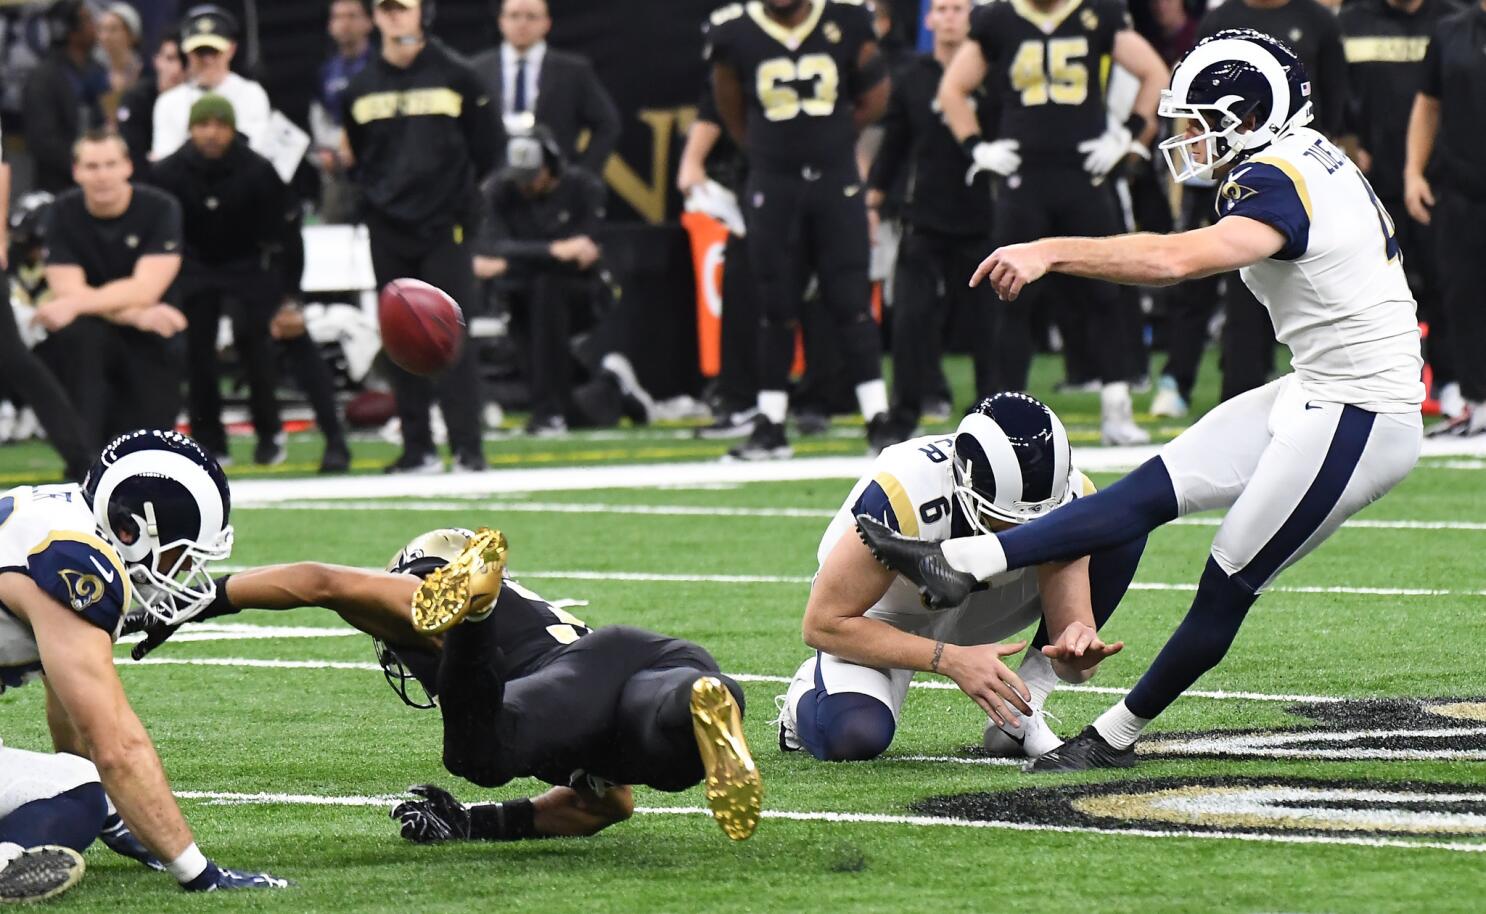 September 15, 2019 New Orleans Saints wide receiver Michael Thomas (13)  carries the ball during the NFL game between the Los Angeles Rams and the New  Orleans Saints at the Los Angeles